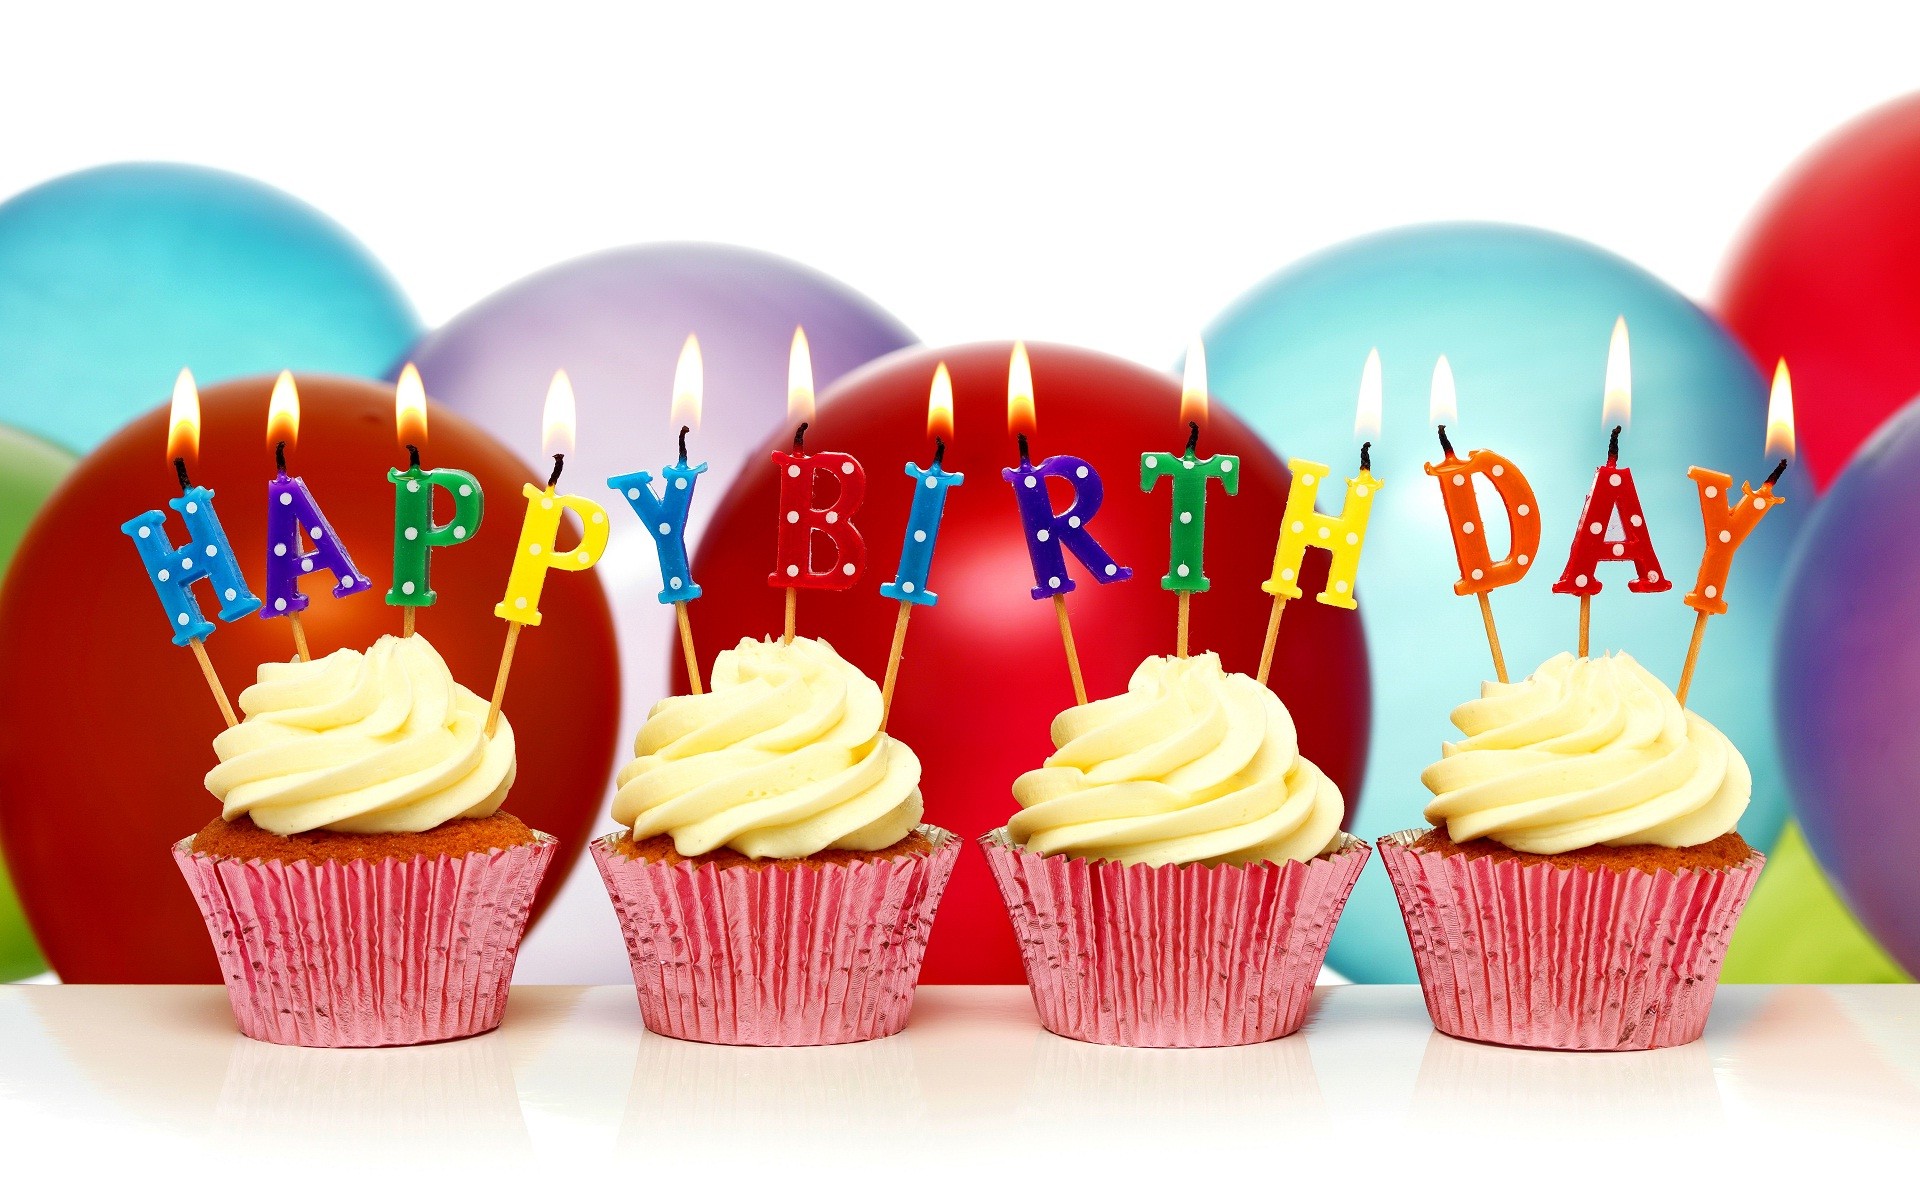 Happy Birthday wallpaper  Download free full HD wallpapers for desktop, mobile, laptop in any ...